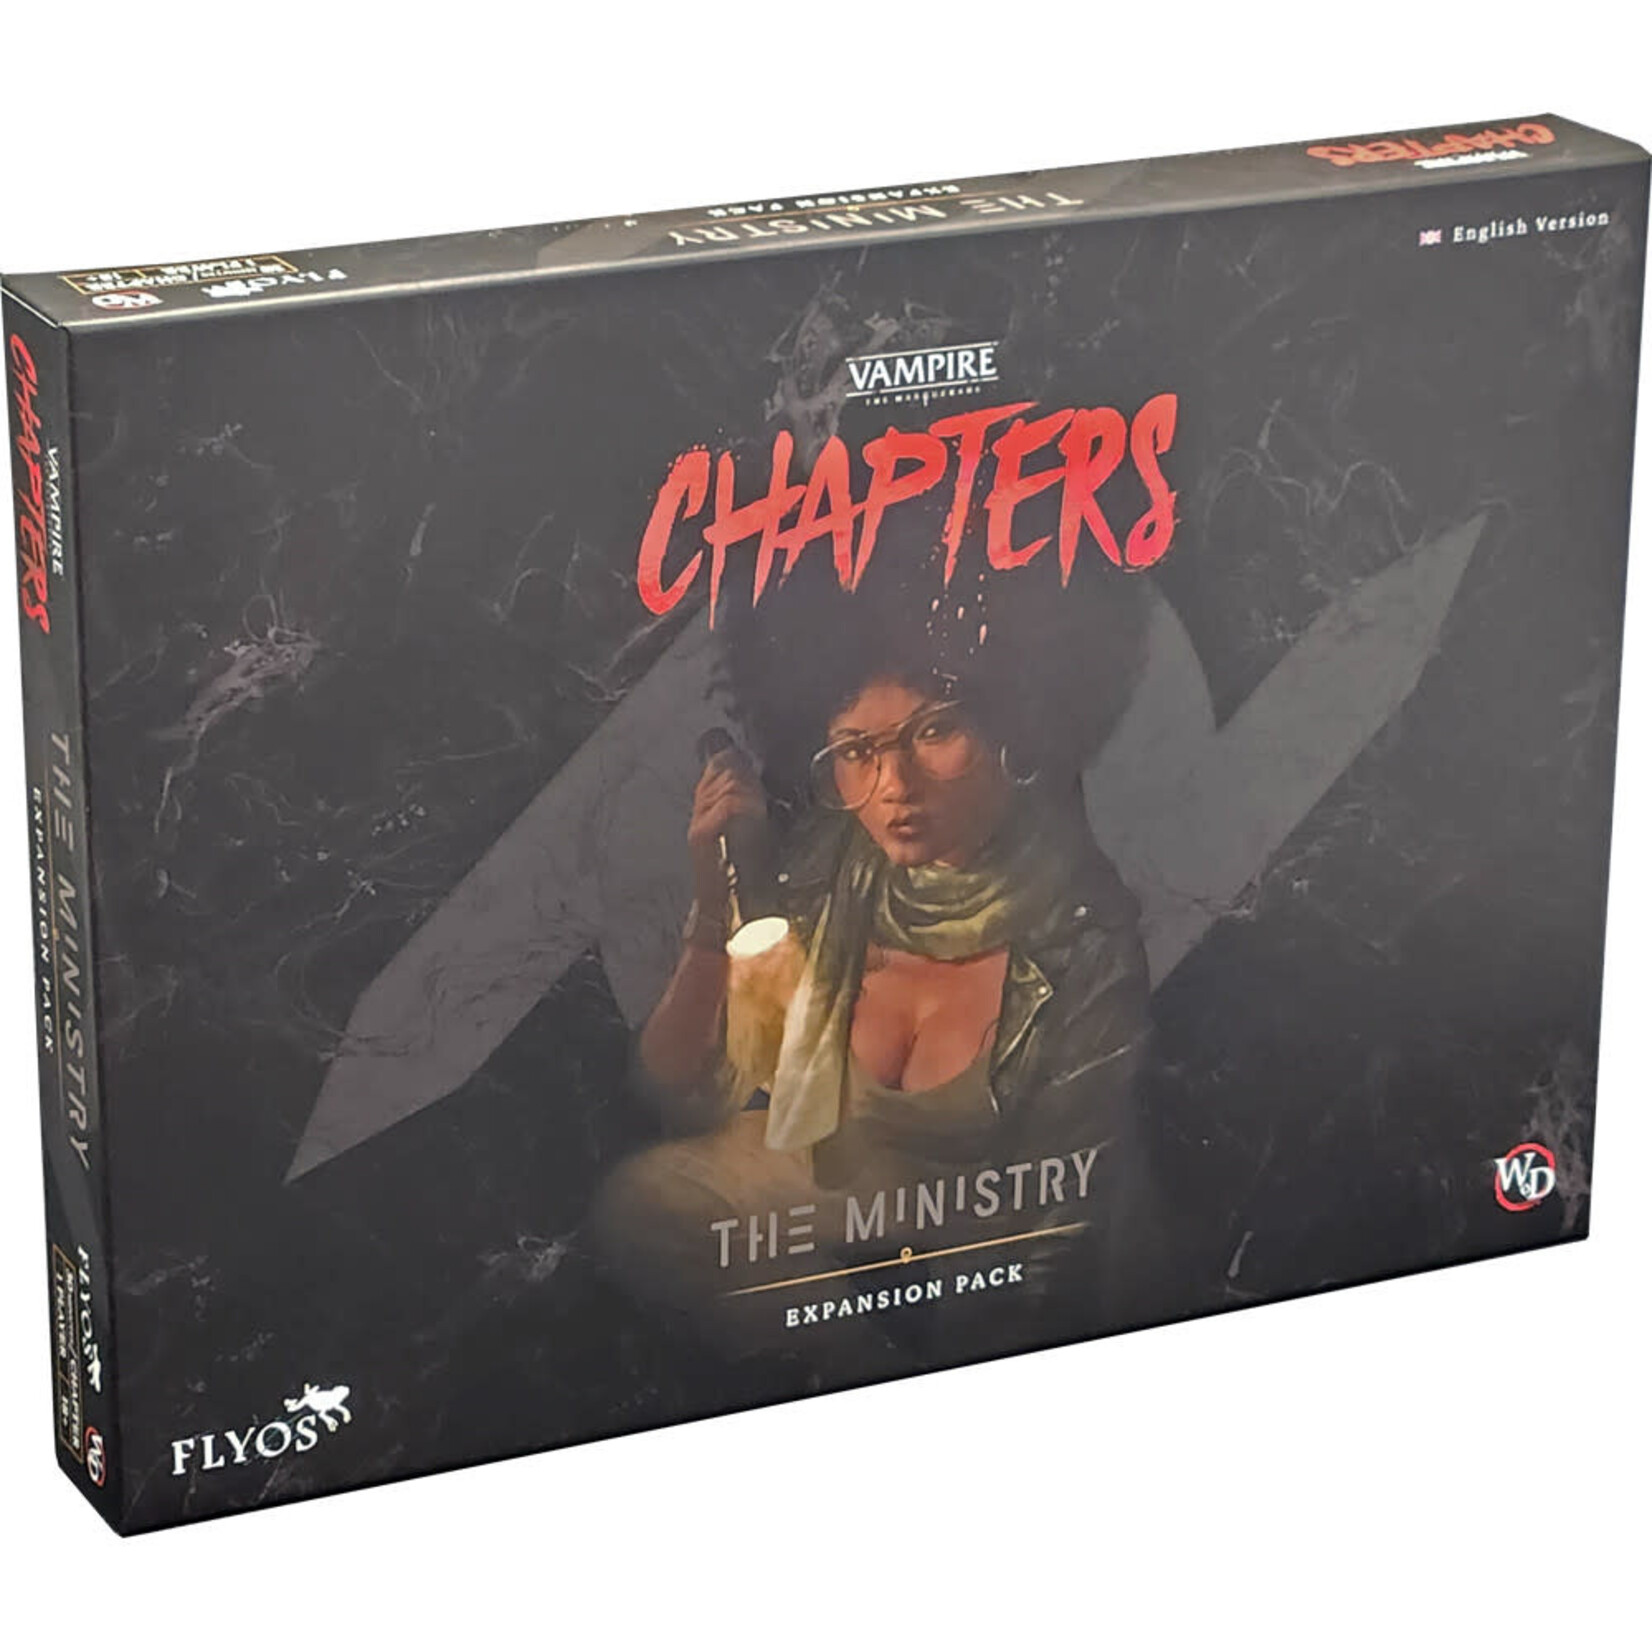 Flyos Games Vampire the Masquerade Chapters The Ministry